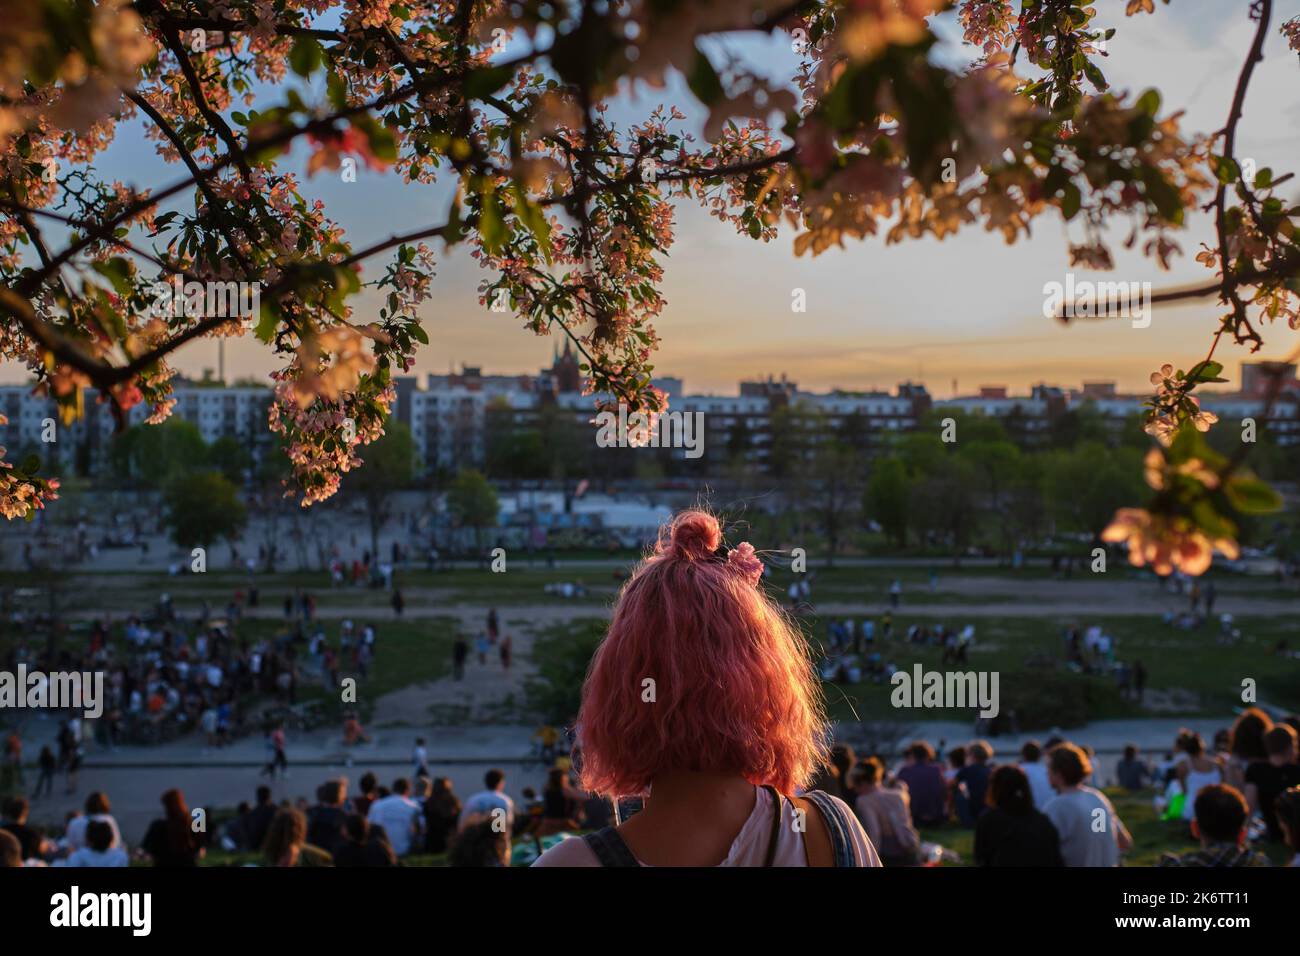 Germany, Berlin, 09. 05. 2021, Sunday afternoon in Mauerpark, meadow on a slope, woman with pink hair in front of pink flowers, evening light Stock Photo